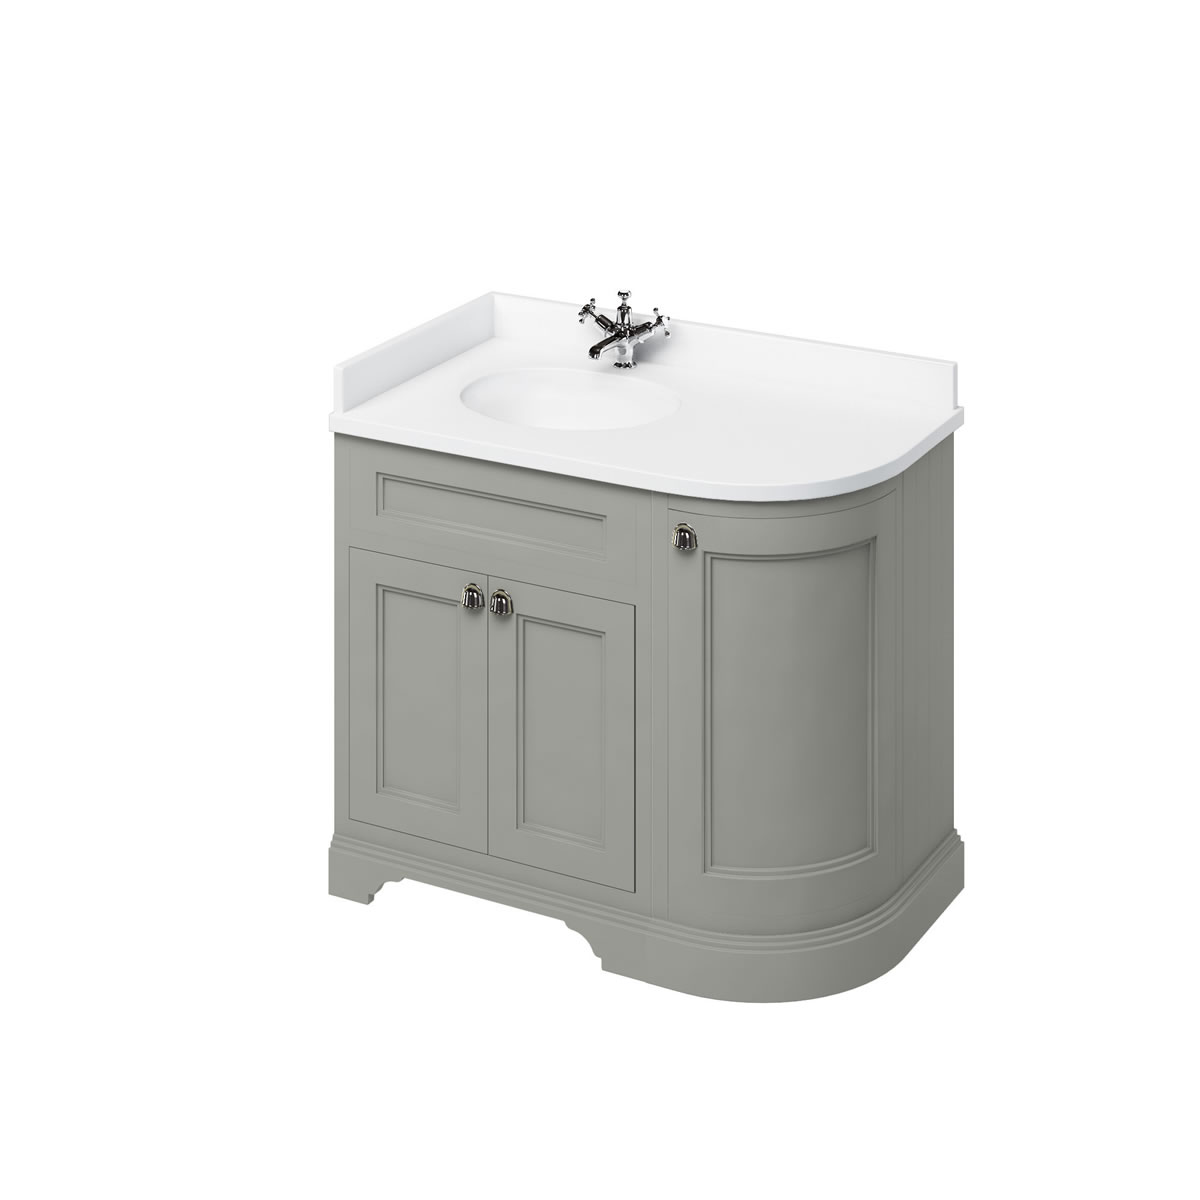 Freestanding 100 Curved Corner Vanity Unit Left Hand - Dark Olive and Minerva white worktop with integrated white basin